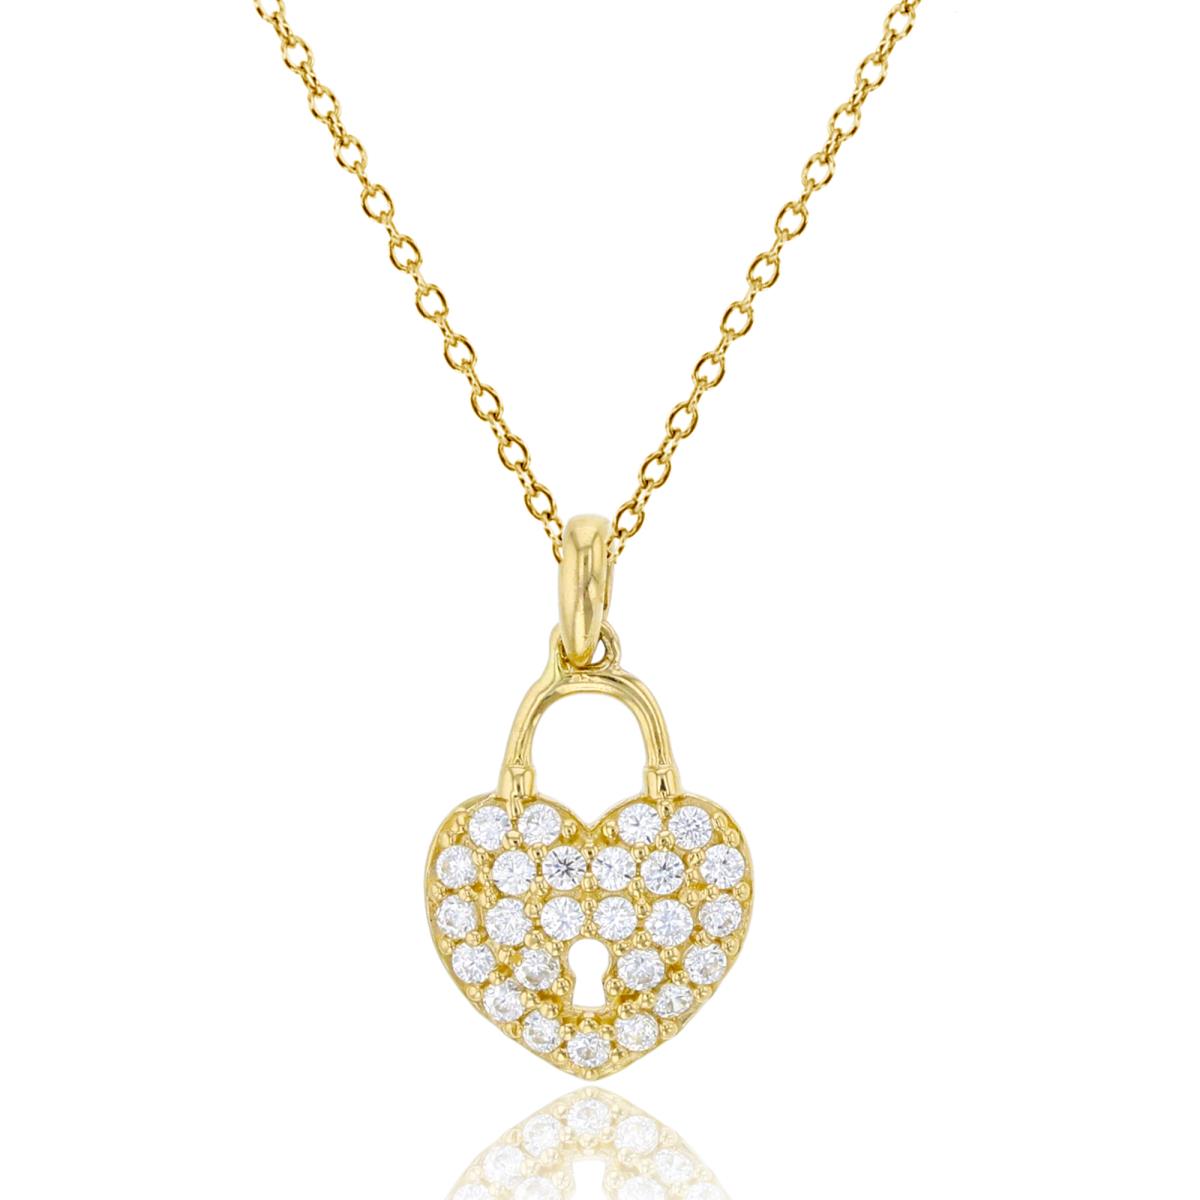 10K Yellow Gold Micropave CZ Heart Lock 18" Necklace